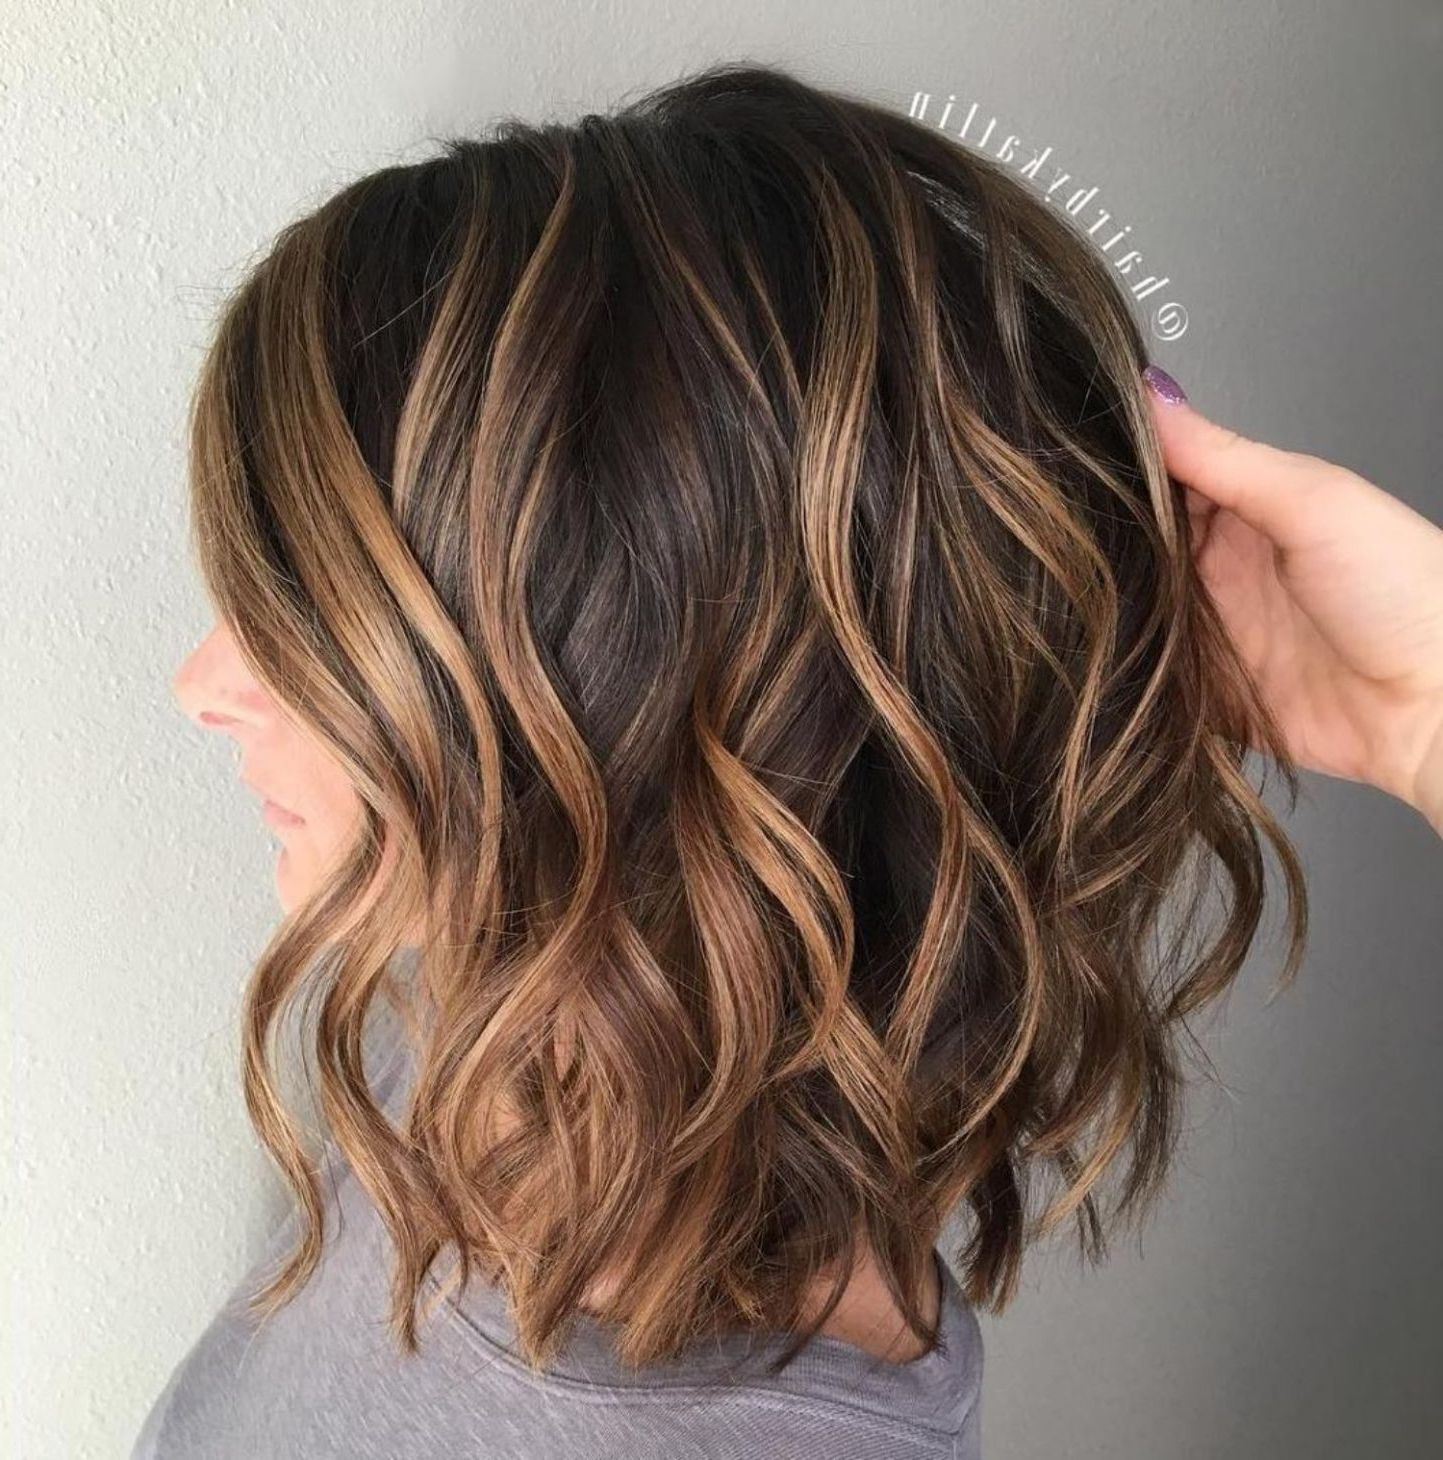 70 Brightest Medium Layered Haircuts To Light You Up In 2019 For Inverted Caramel Bob Hairstyles With Wavy Layers (View 6 of 20)